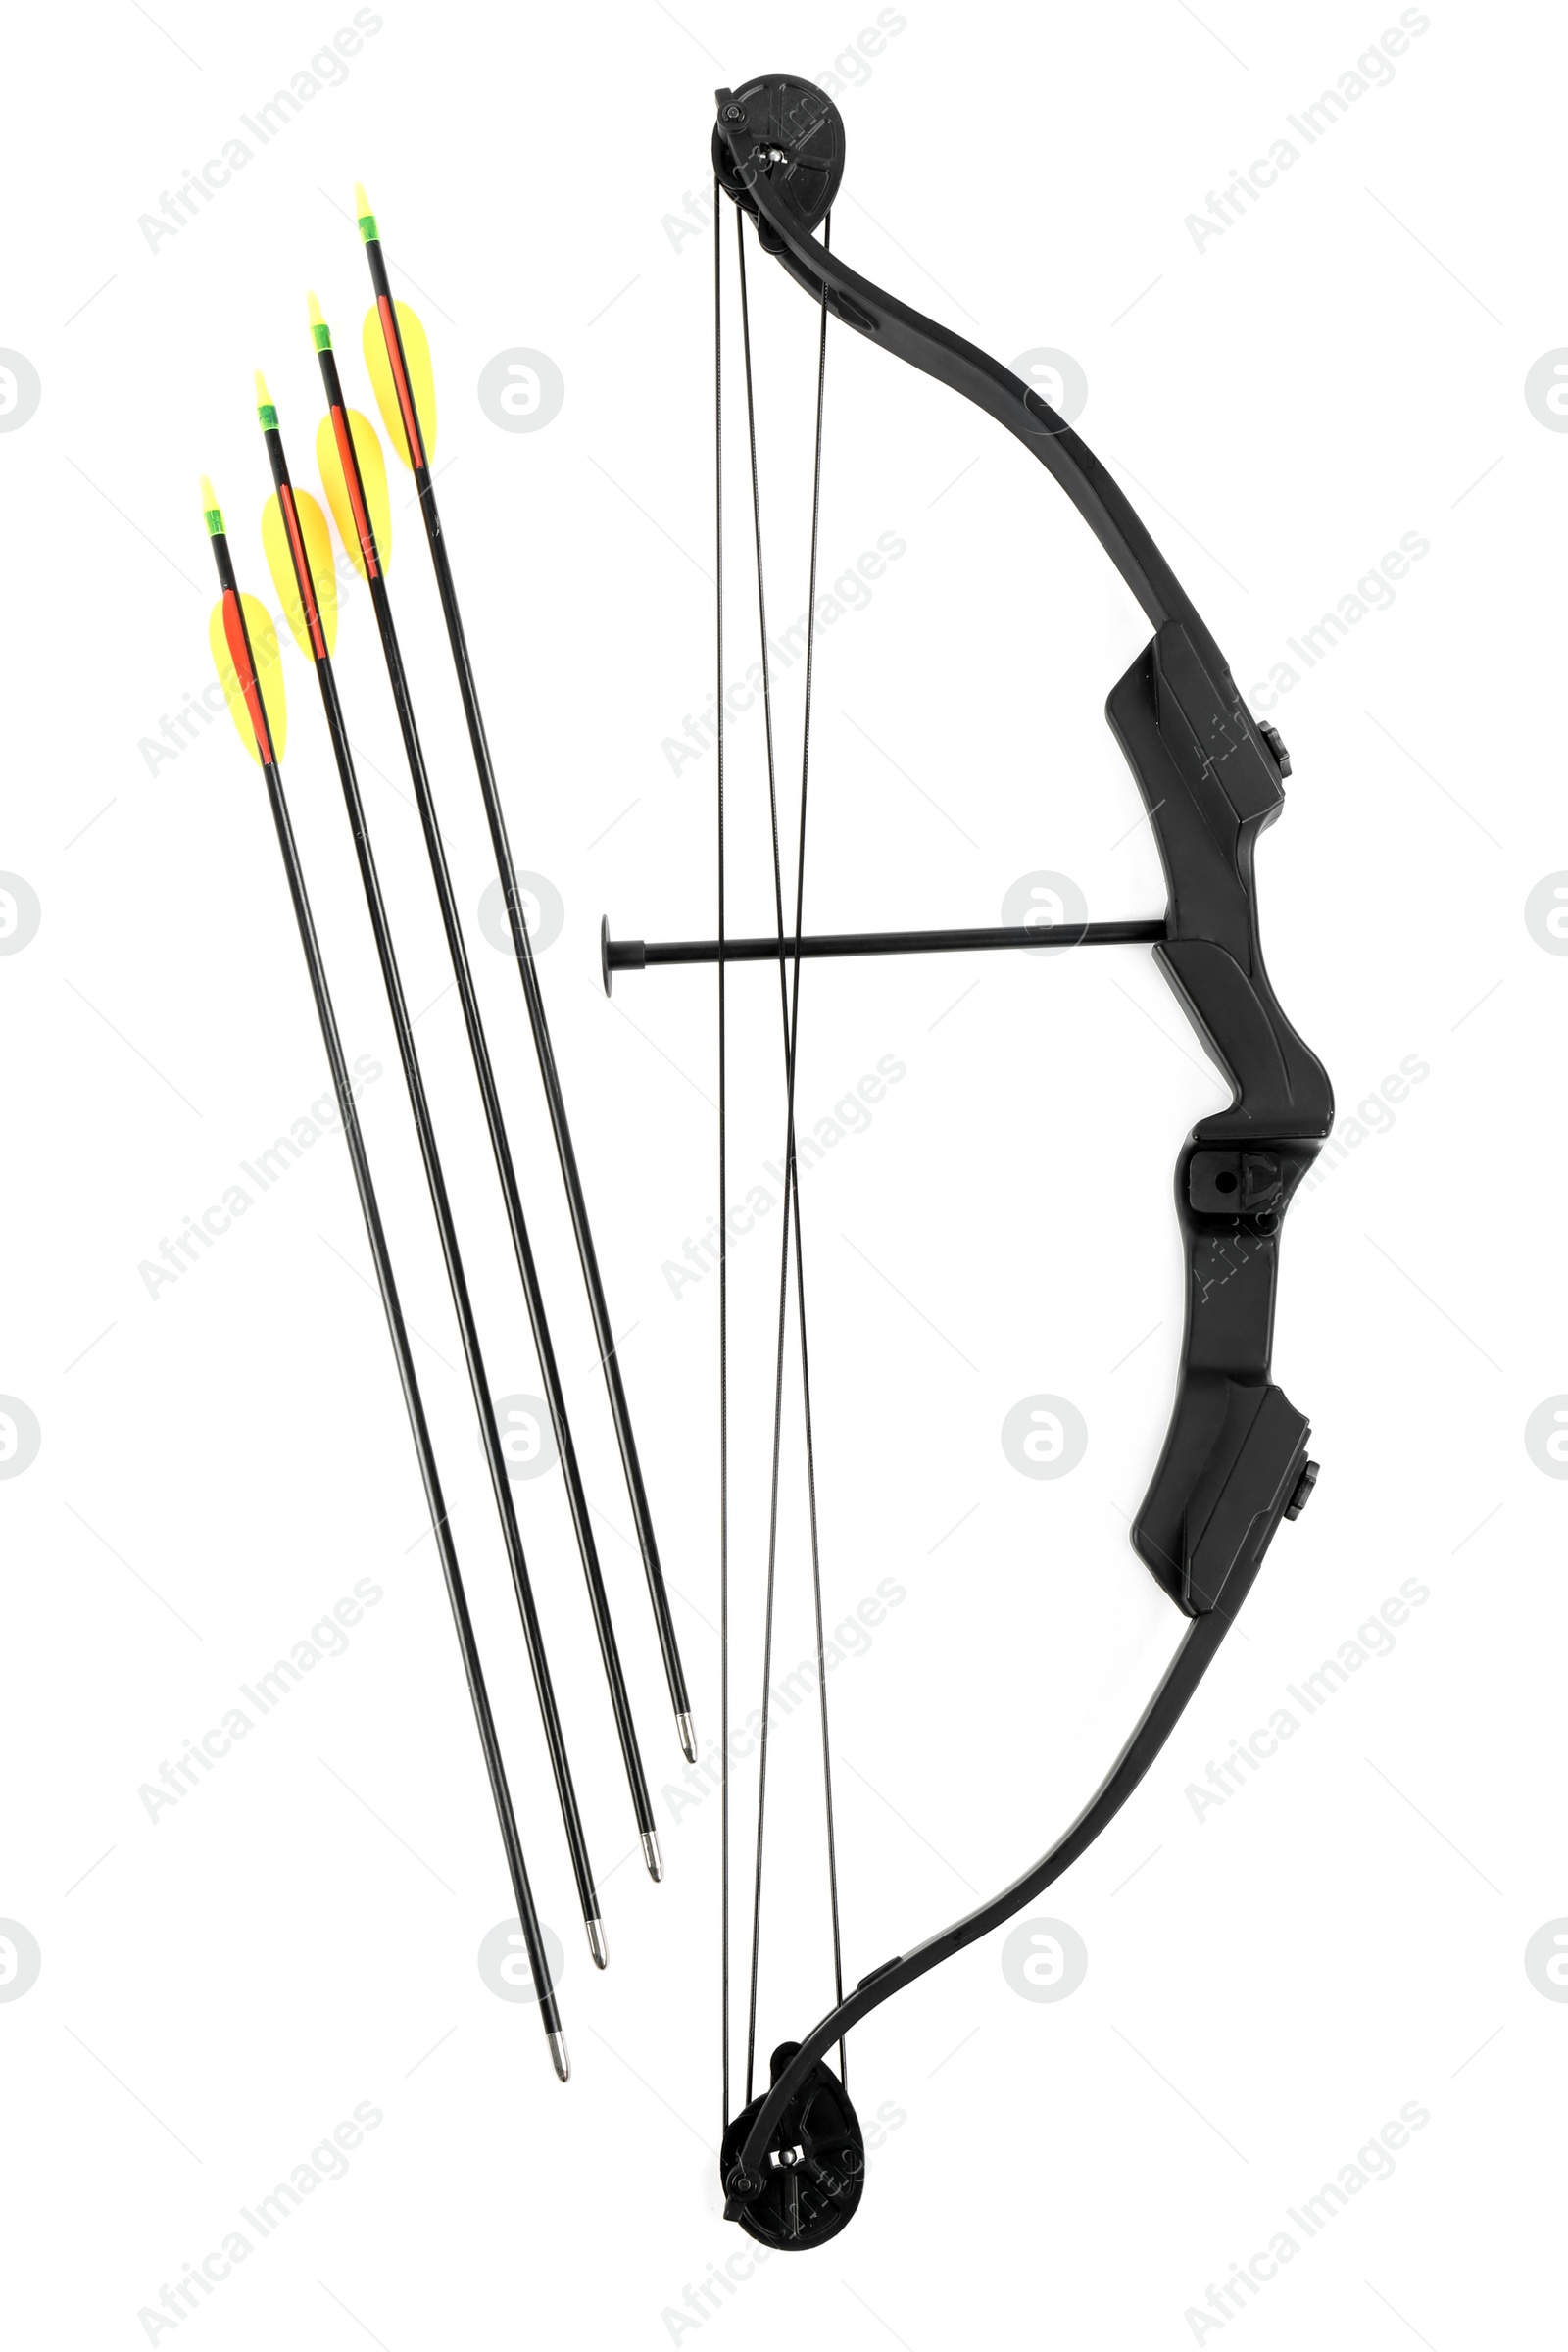 Photo of Black bow and plastic arrows on white background, top view. Archery sports equipment